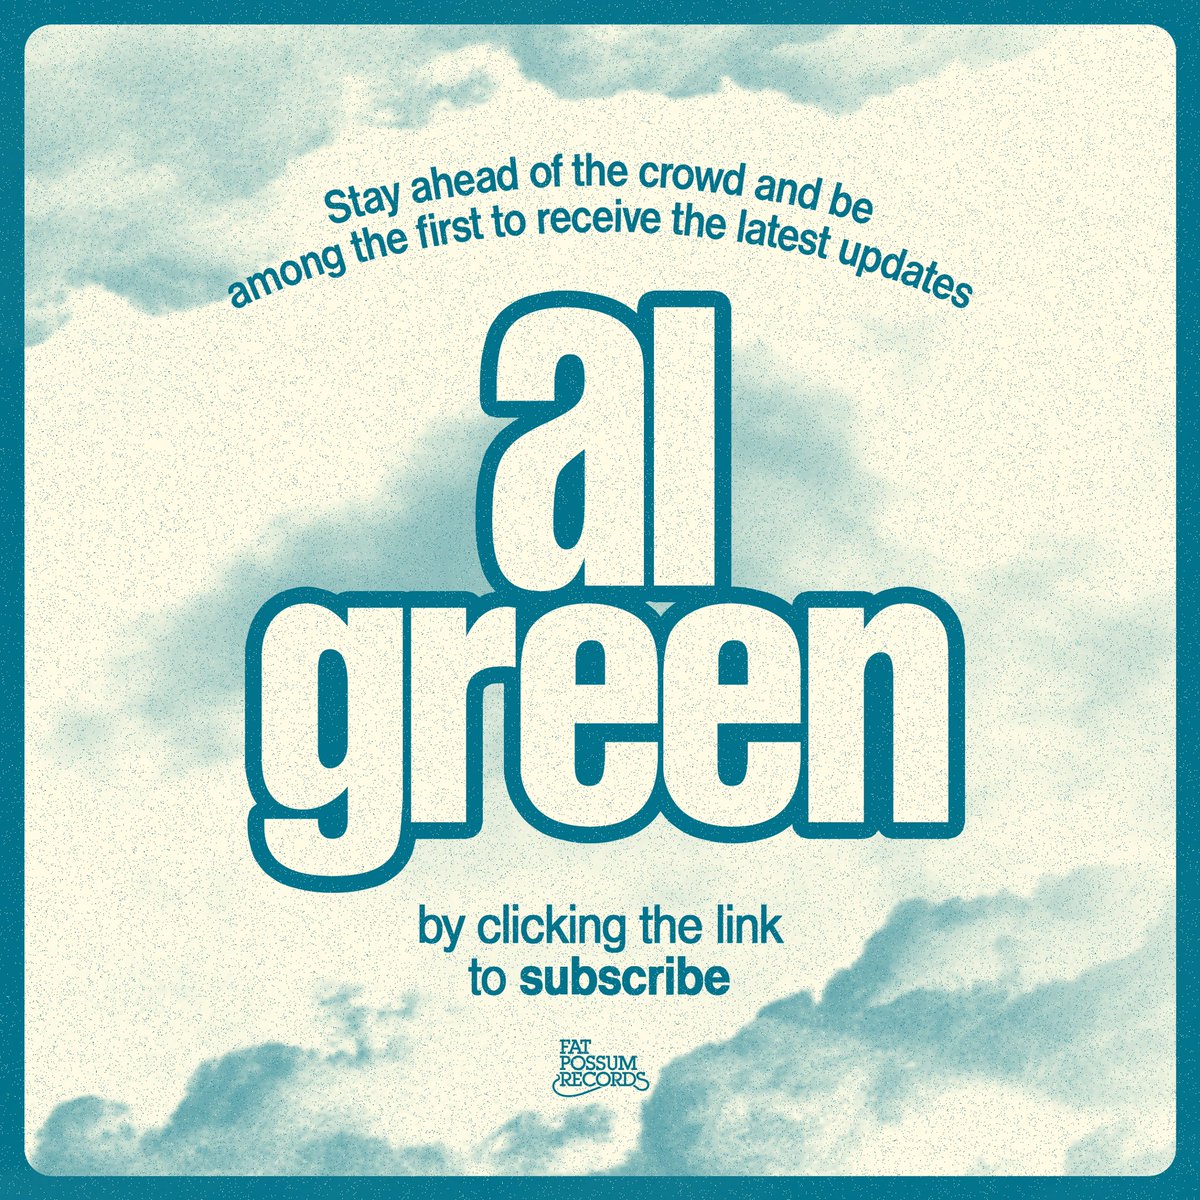 Have you signed up to receive the latest updates from Al Green? Follow the link below! laylo.com/algreen